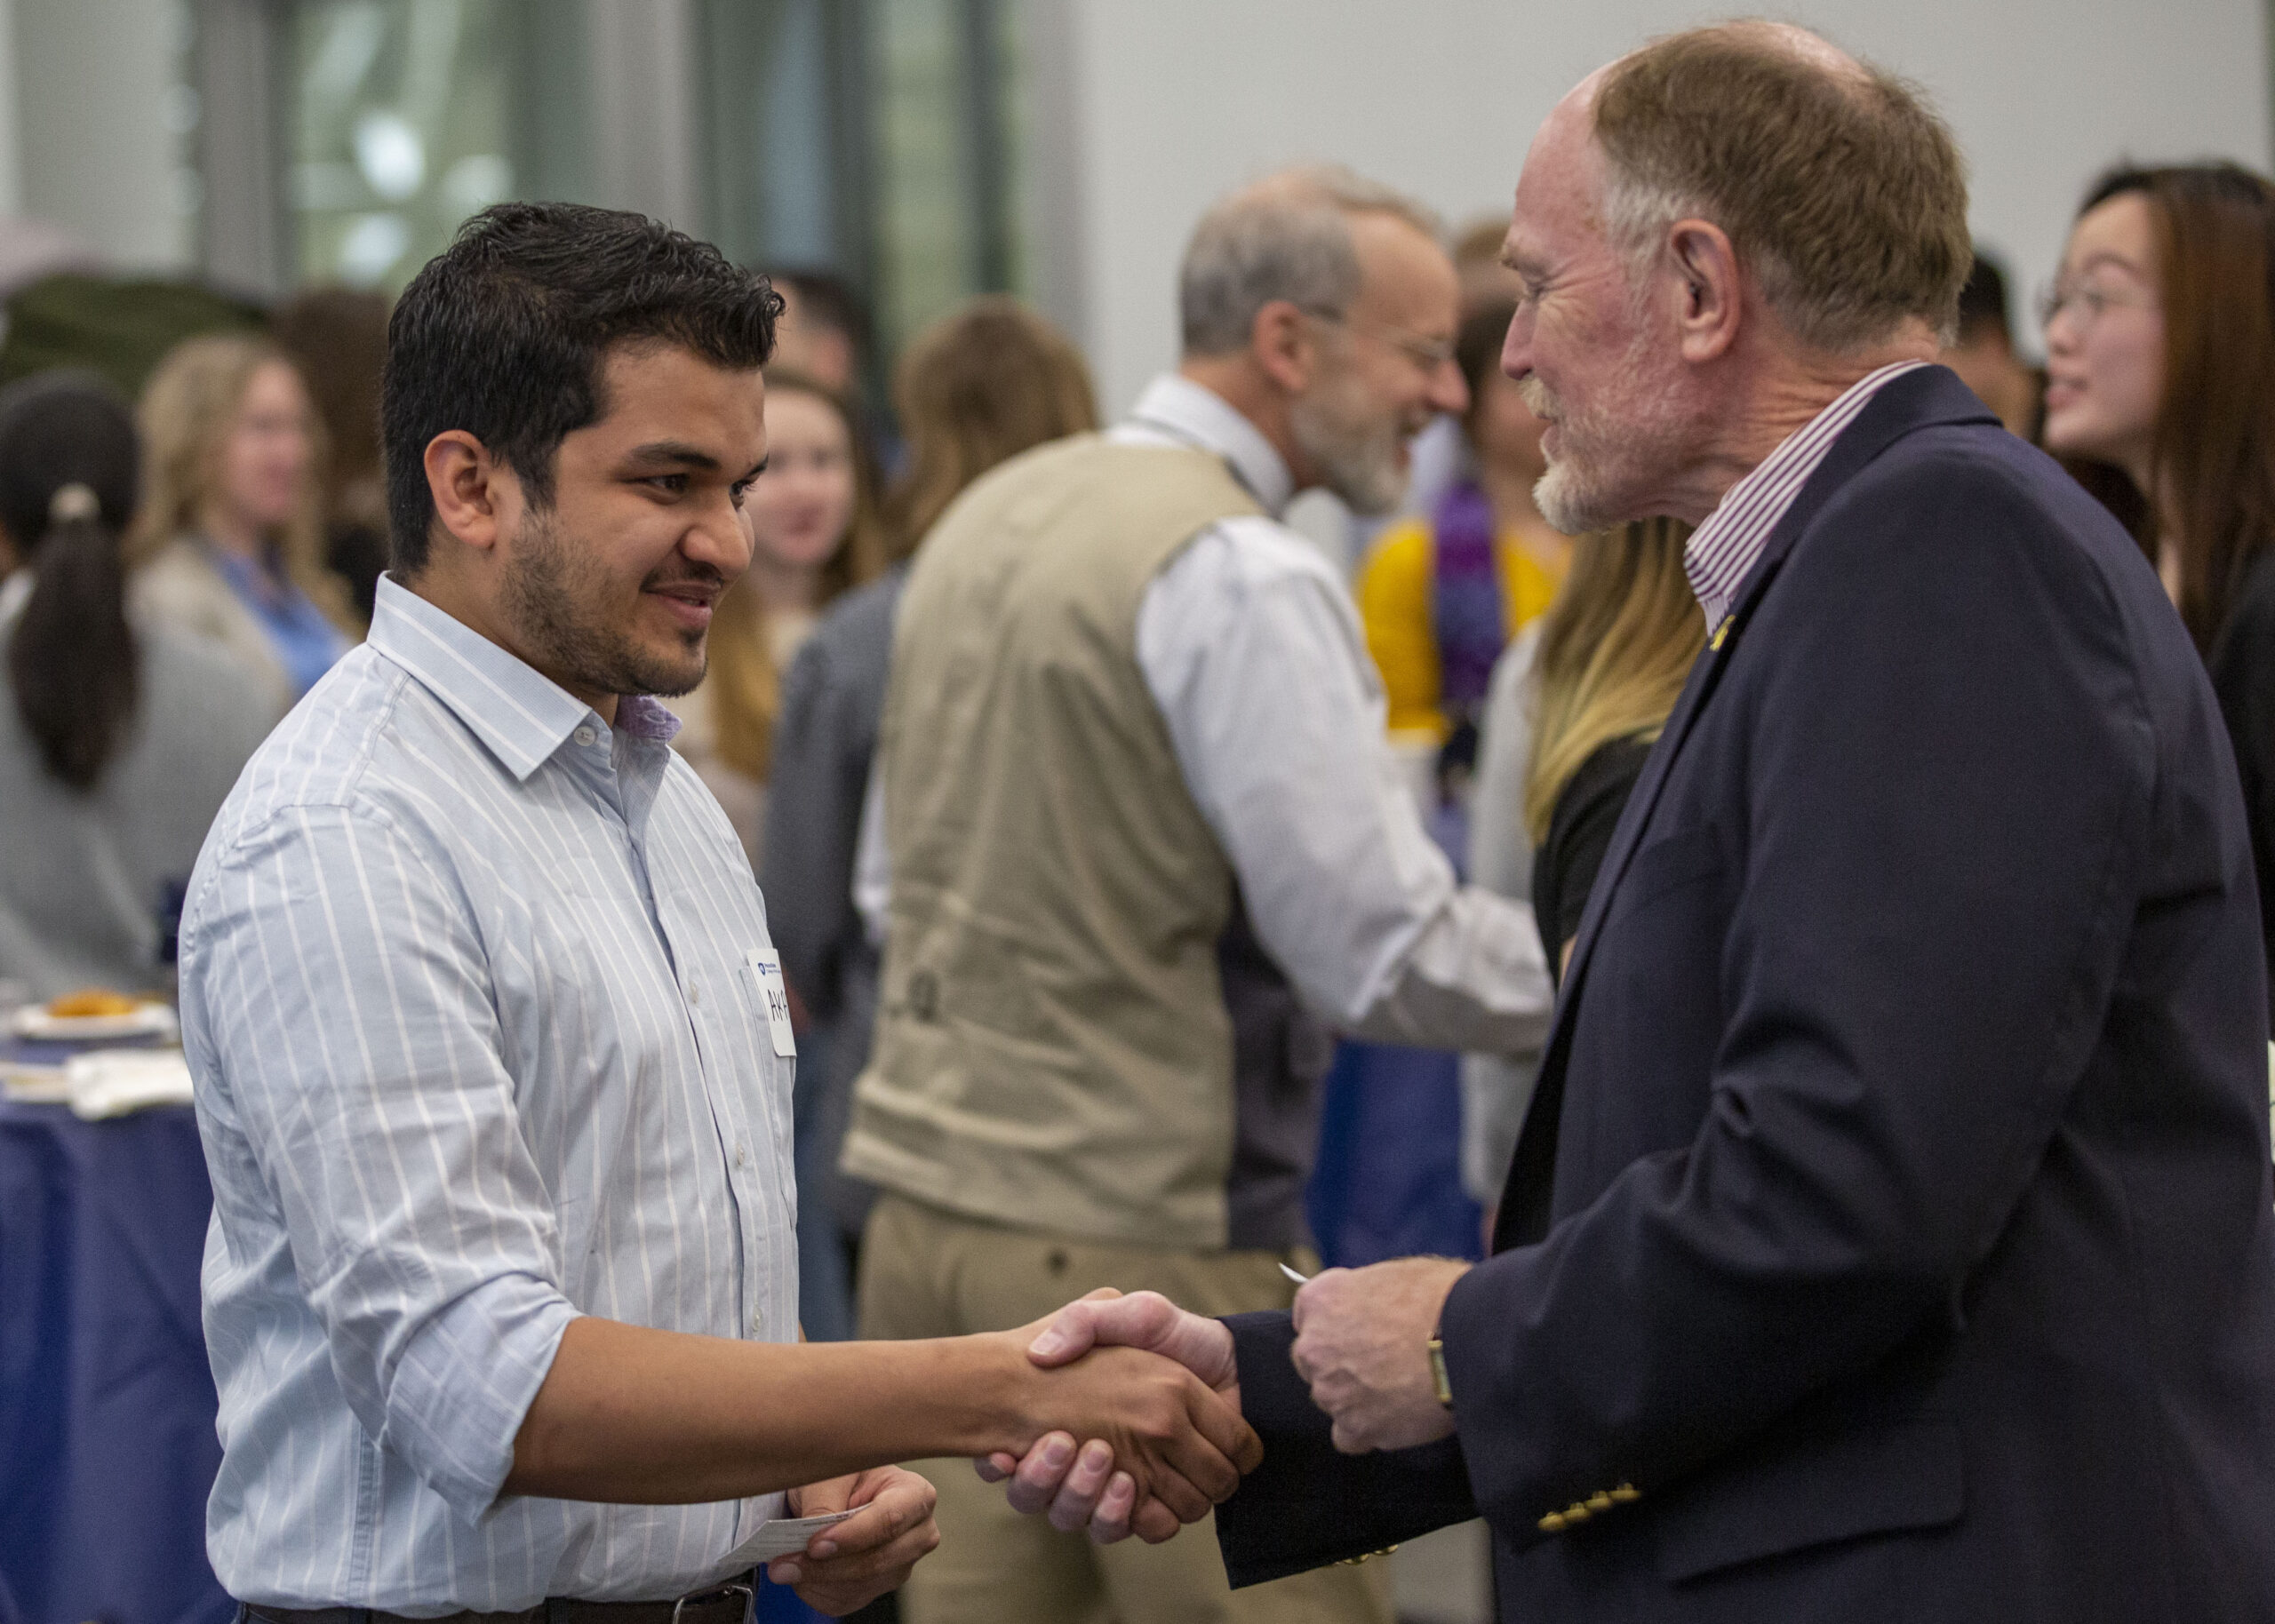 A Liberal Arts student (left) shakes hands with alumnus Jeff Hyde (right) at a Liberal Arts Career Week event in January 2020.